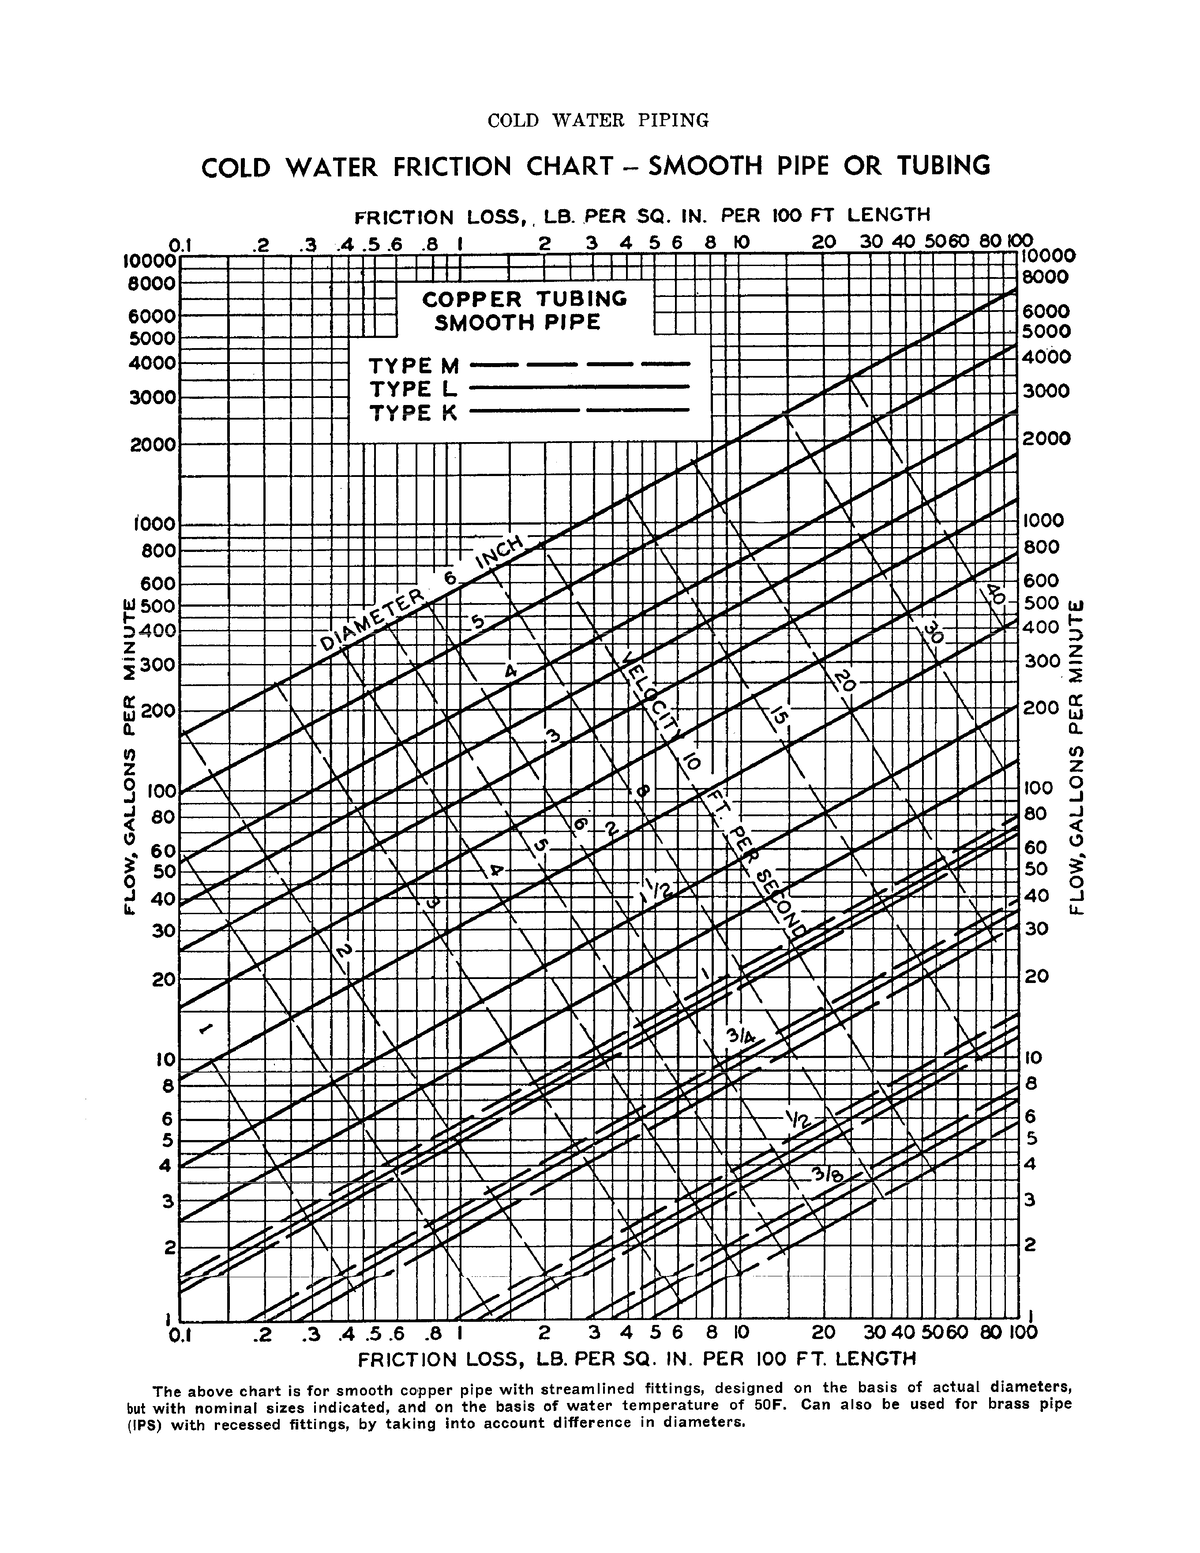 Friction Loss and pipe sizing chart - MBA 5015 - Studocu